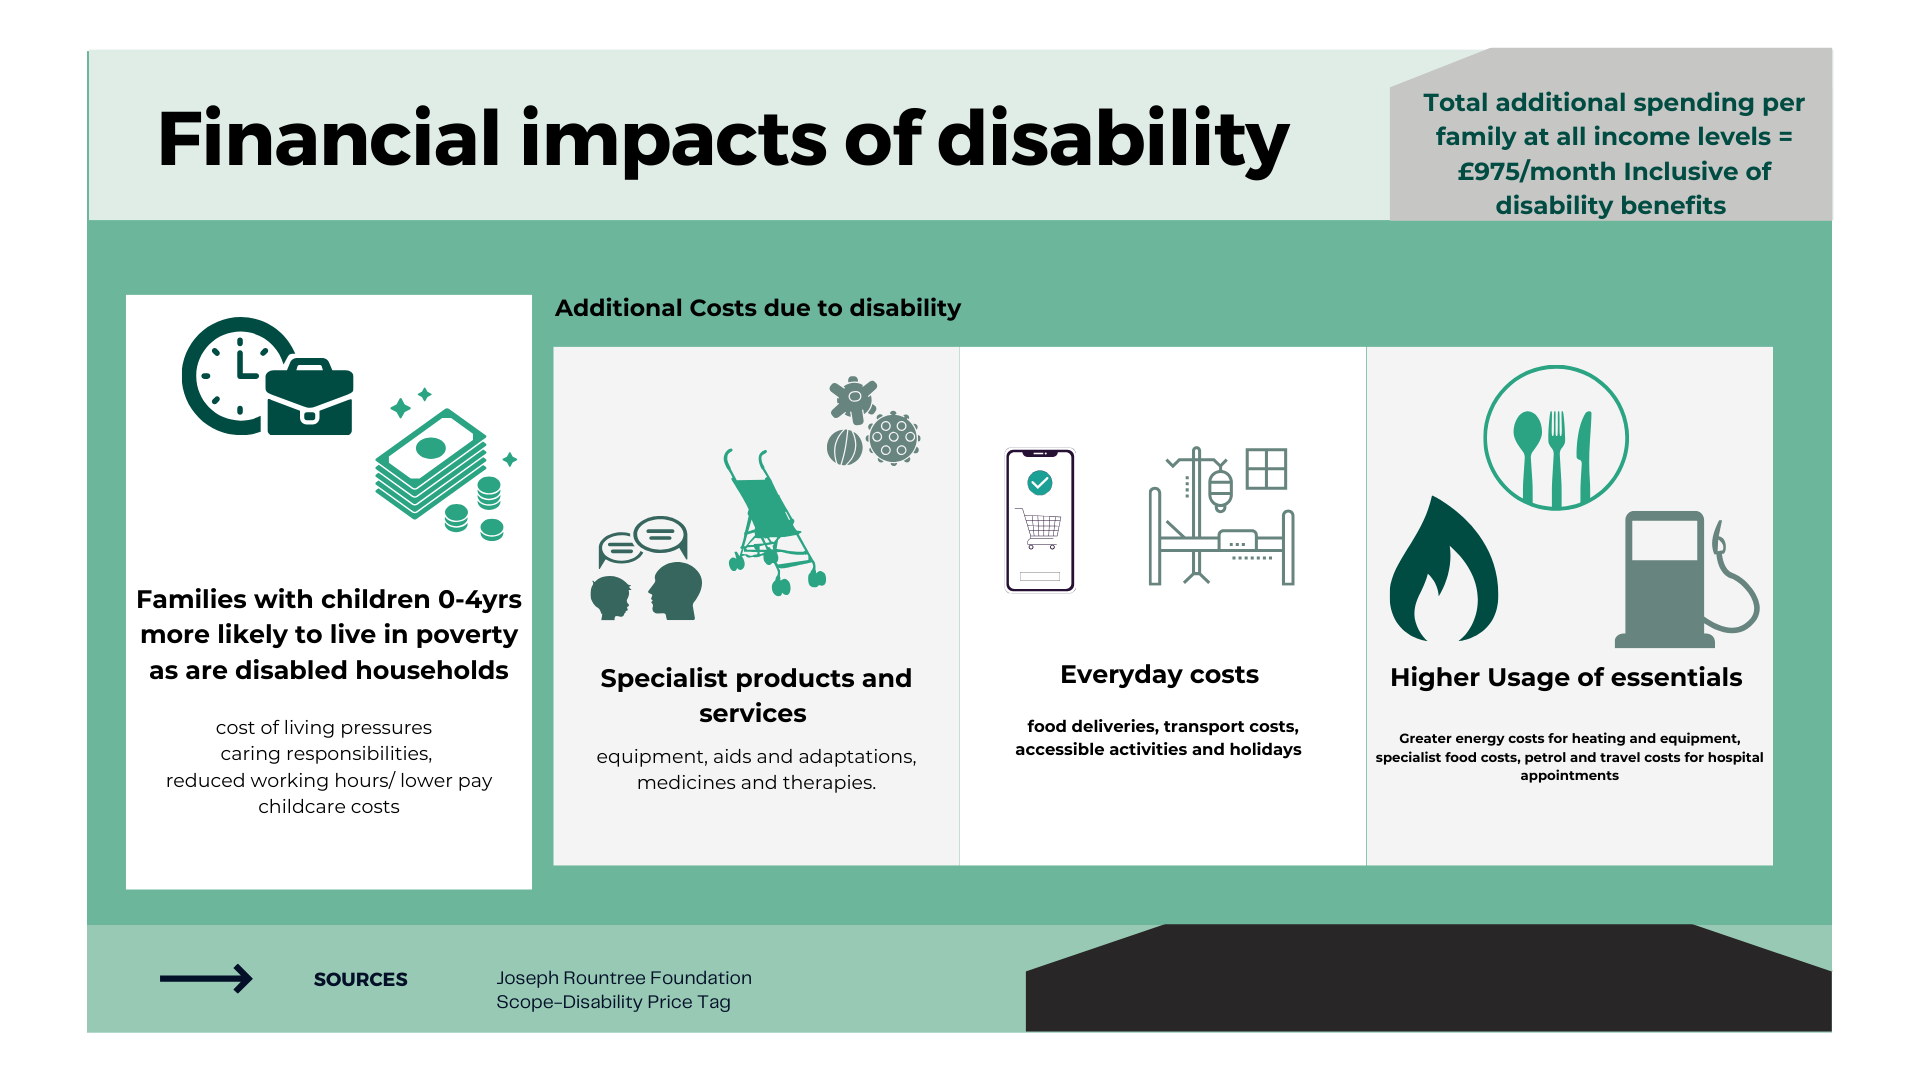 The images represent four financial impacts which affect families with disabled children: underlying cost of living pressures, specialist products and services, increased everyday costs and higher usage of essentials. These amount to a Disability Price Tag of £975 per month.